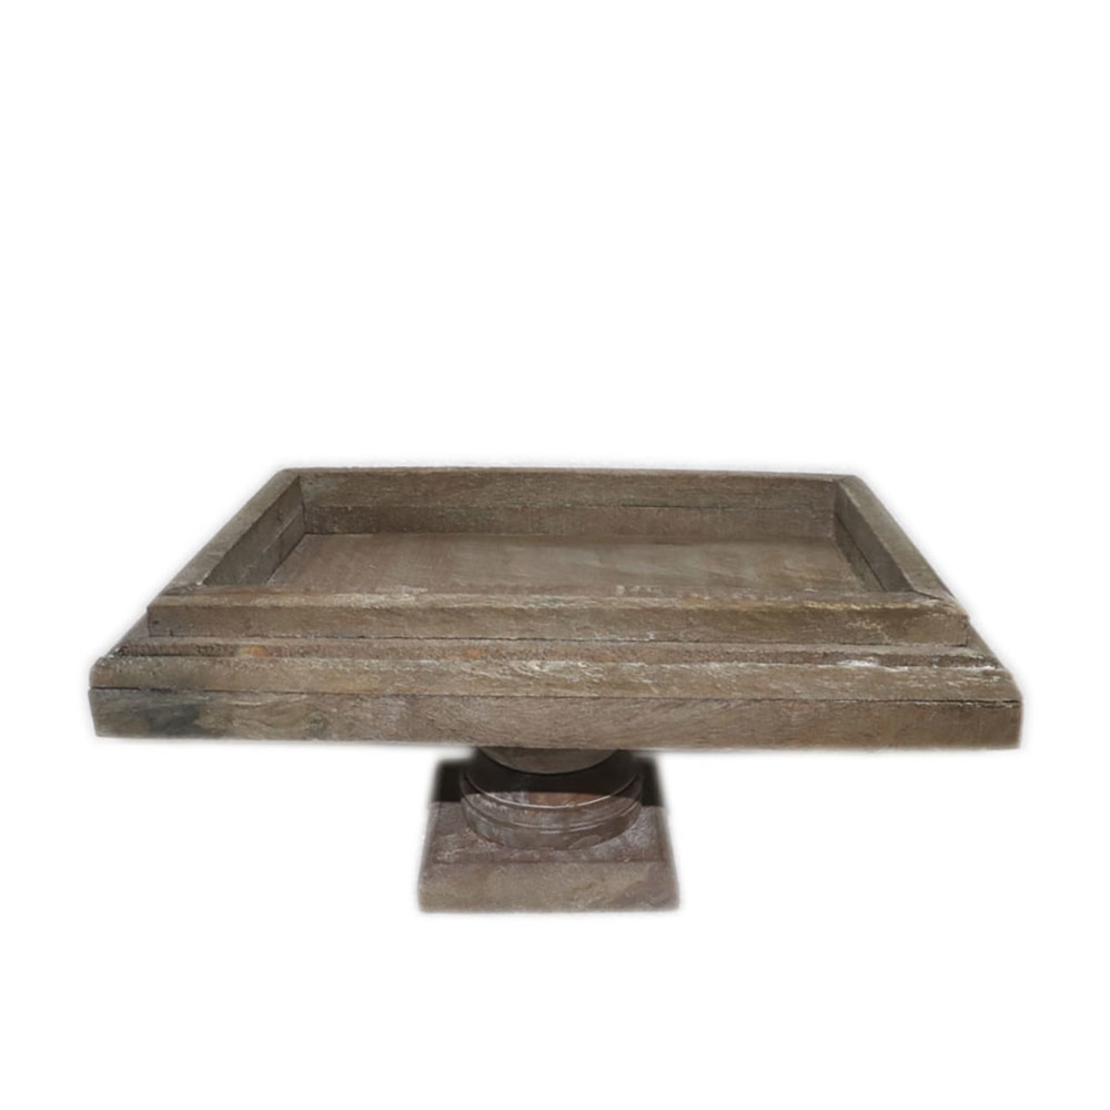 INDI TRAY WOOD NATURAL ANTIQUE 35,5x25xH18cm IN